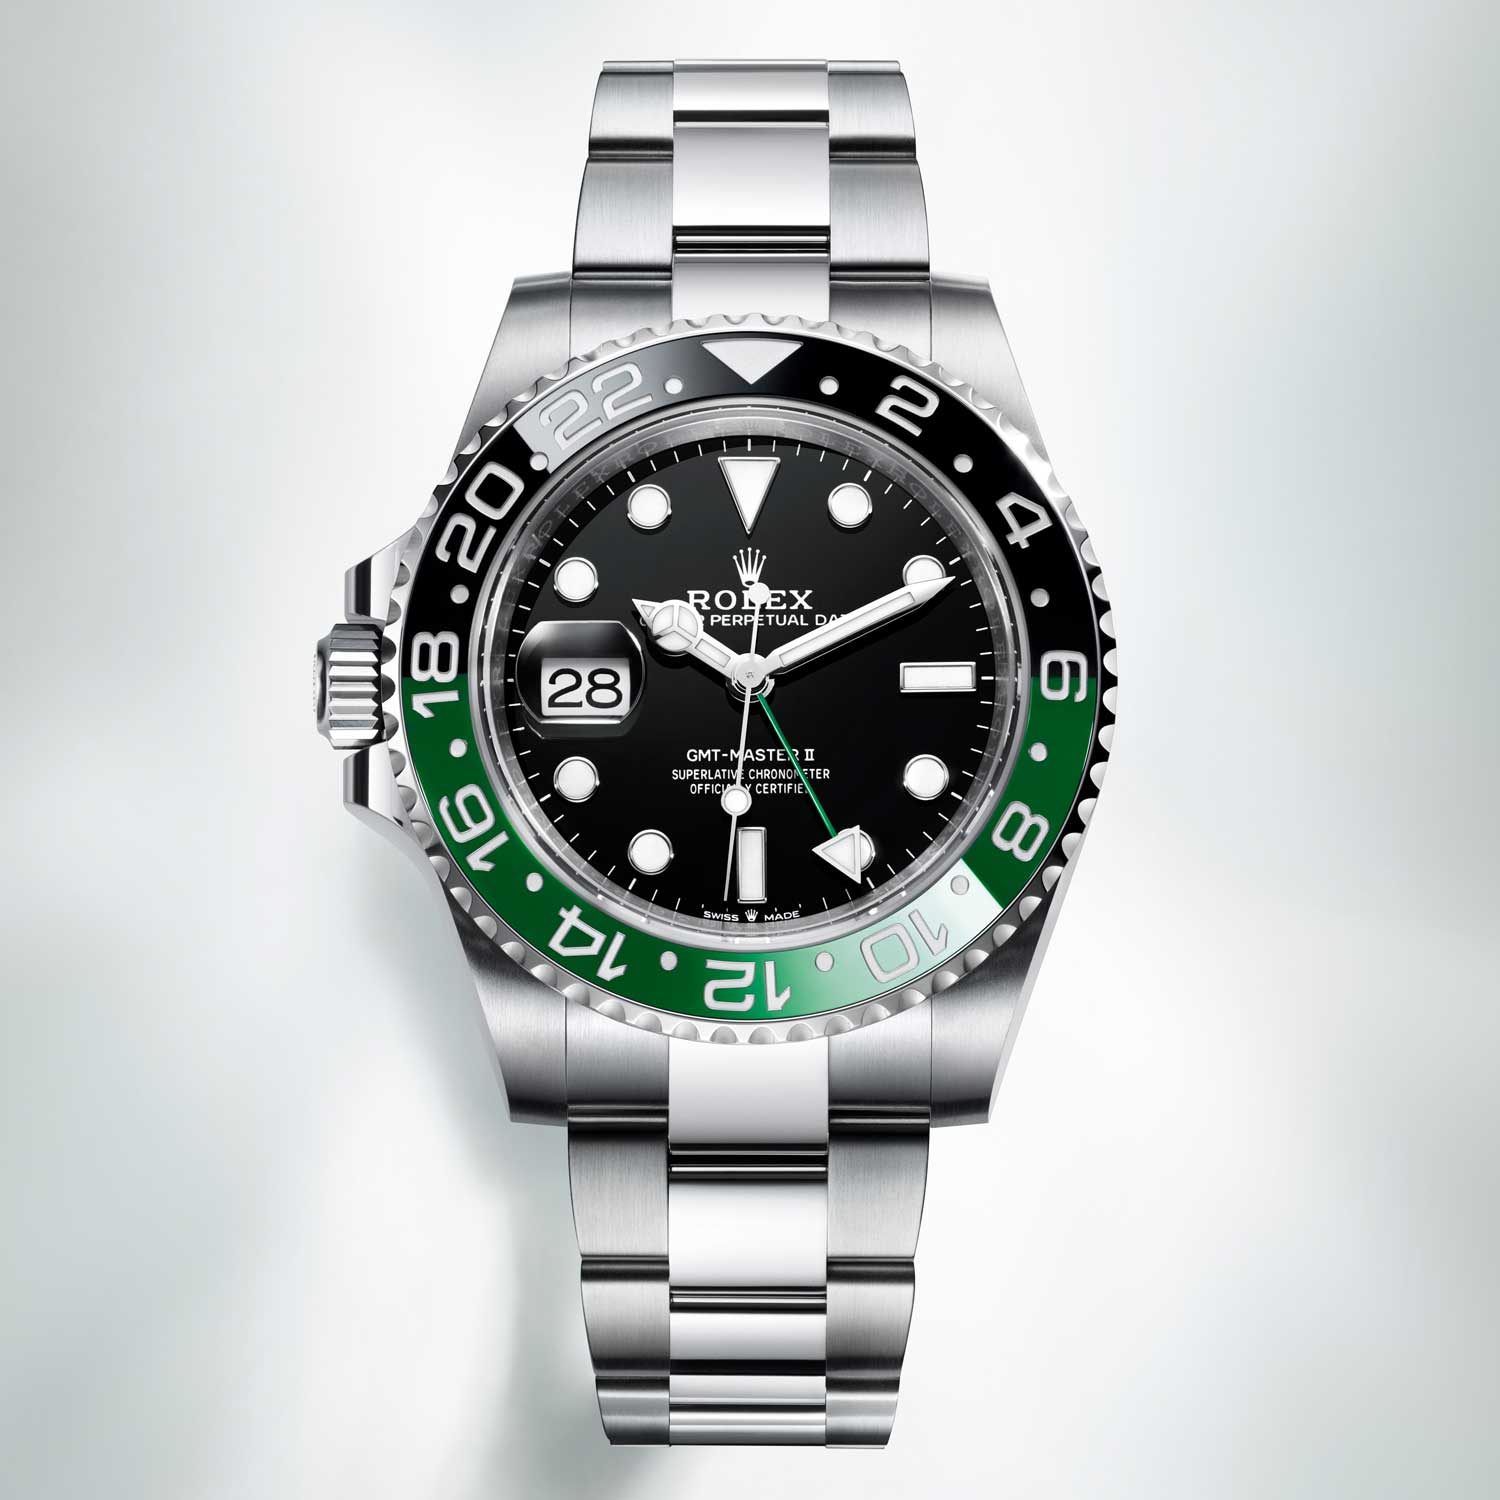 The first and only left-handed Rolex Oyster Perpetual GMT-Master II